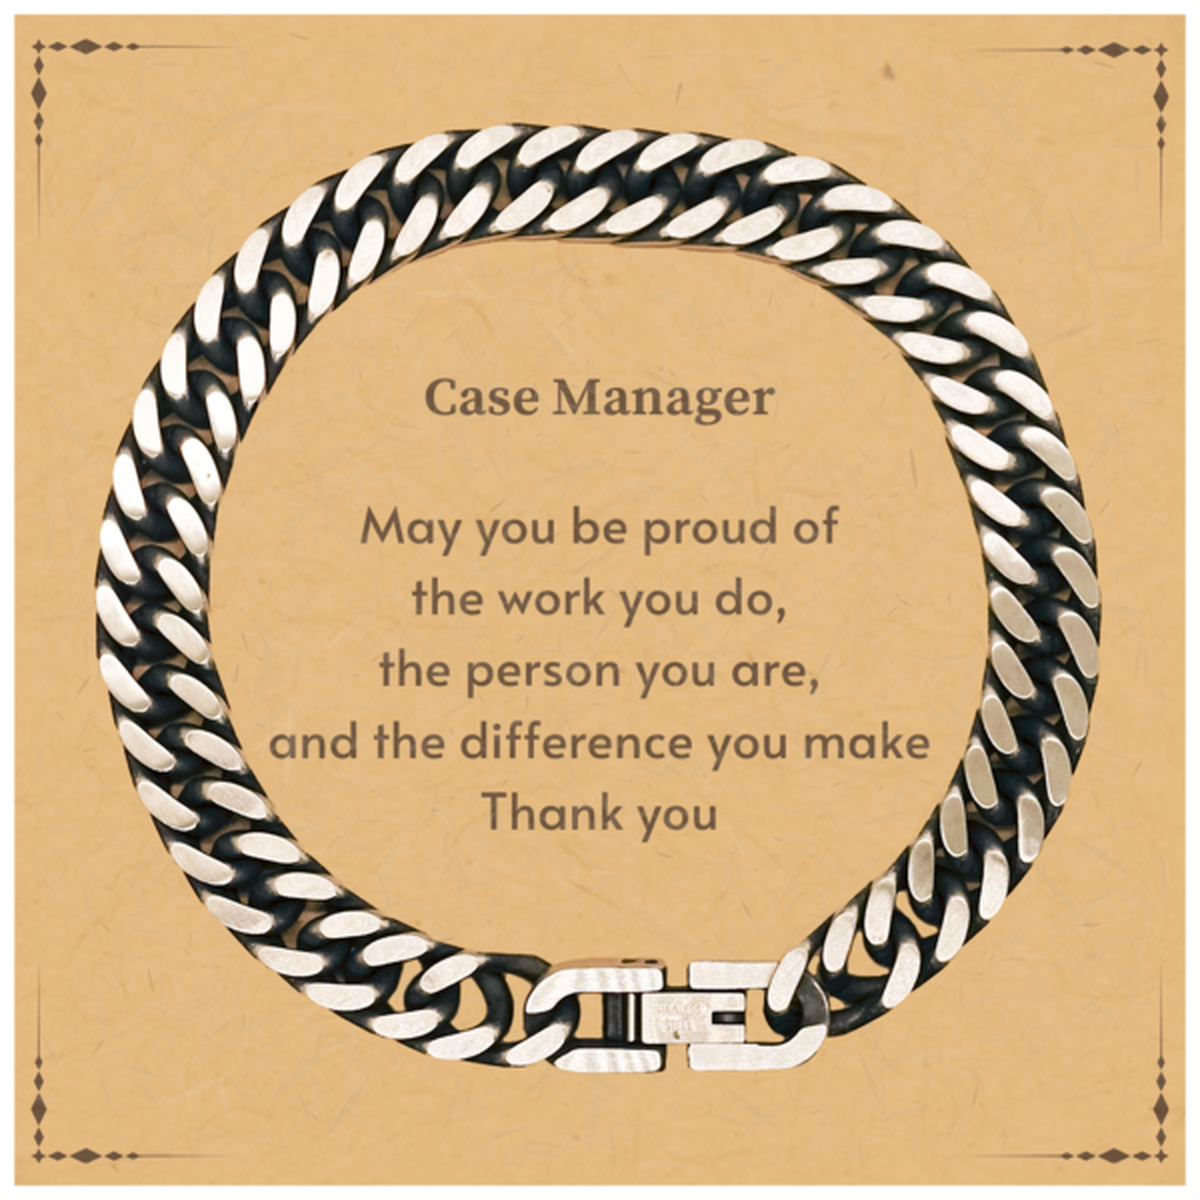 Heartwarming Cuban Link Chain Bracelet Retirement Coworkers Gifts for Case Manager, Case Manager May You be proud of the work you do, the person you are Gifts for Boss Men Women Friends